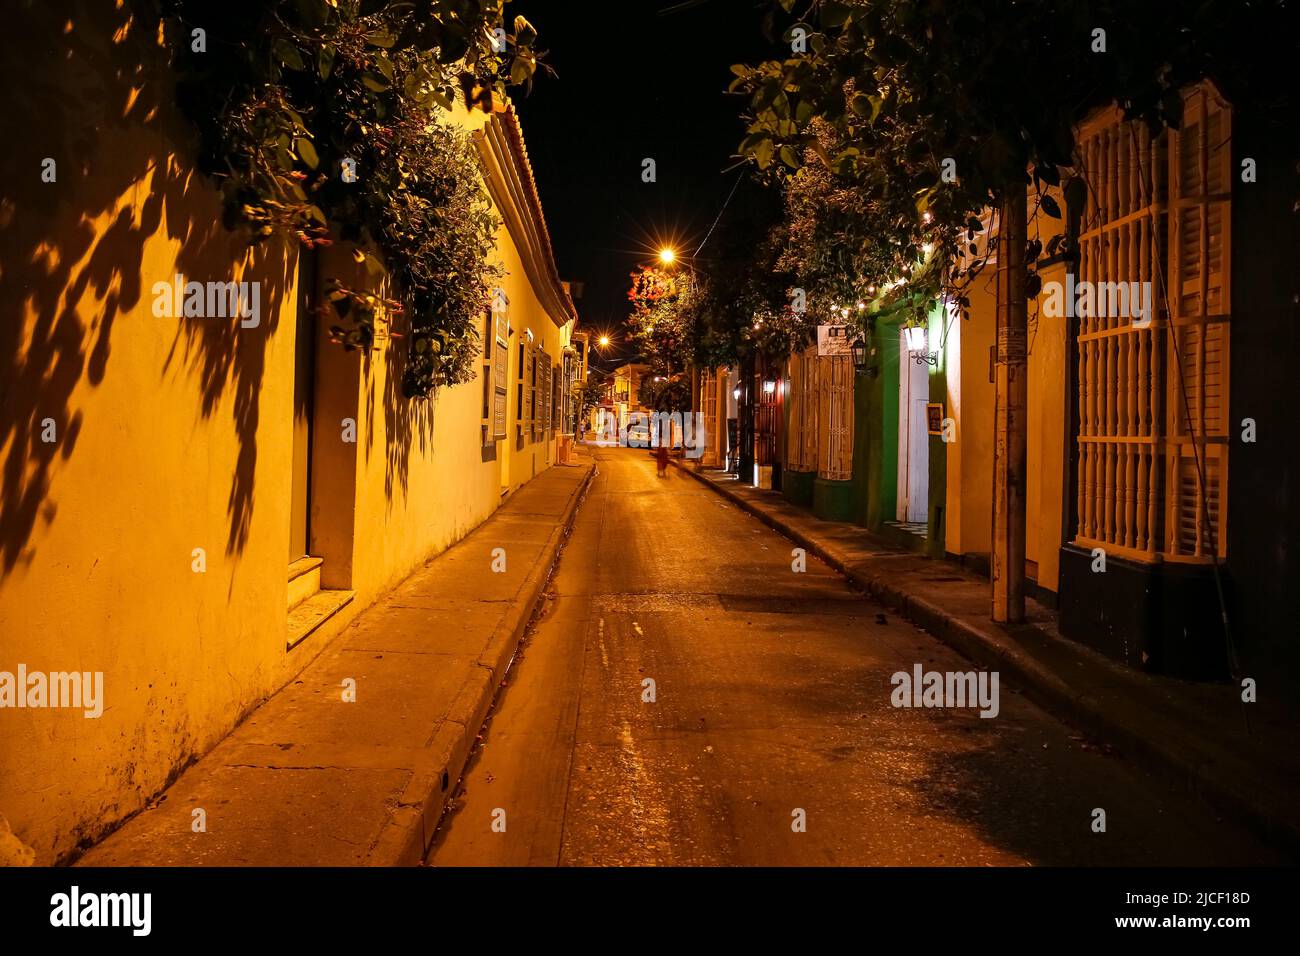 Iluminated empty street at night with colonial buildings in Cartagena, Unesco World Heritage Stock Photo